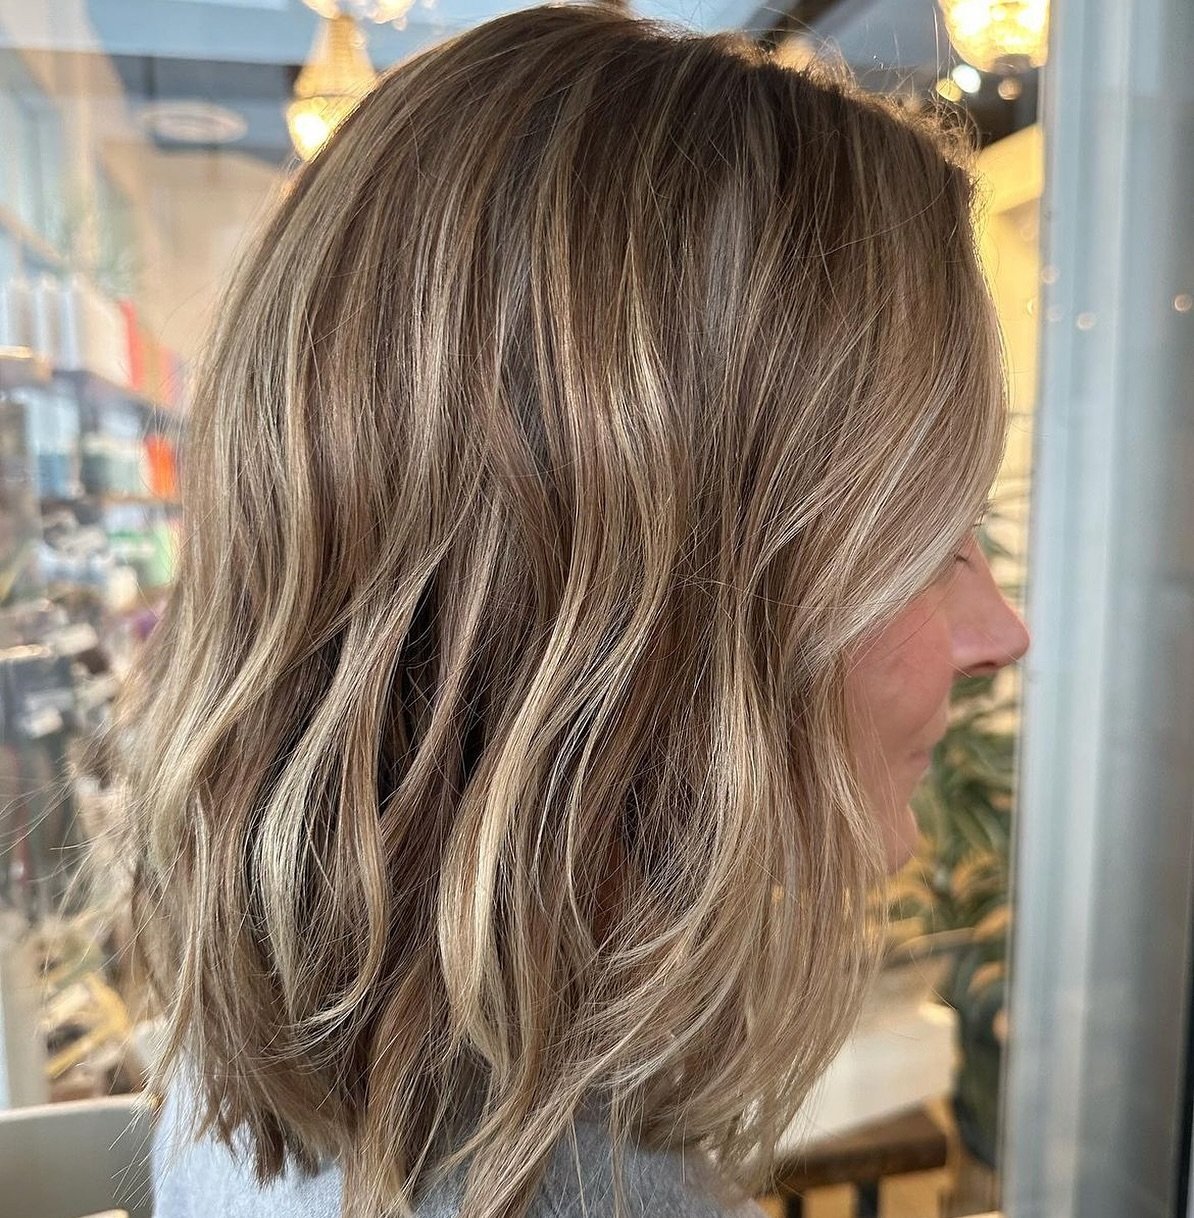 Just a soft, natural looking lighten-and-brighten for Robyn&rsquo;s guest 🤩

📷 @robyndoeshair

____
Blonde hair &bull; babylights &bull; blonde inspo &bull; copper lane